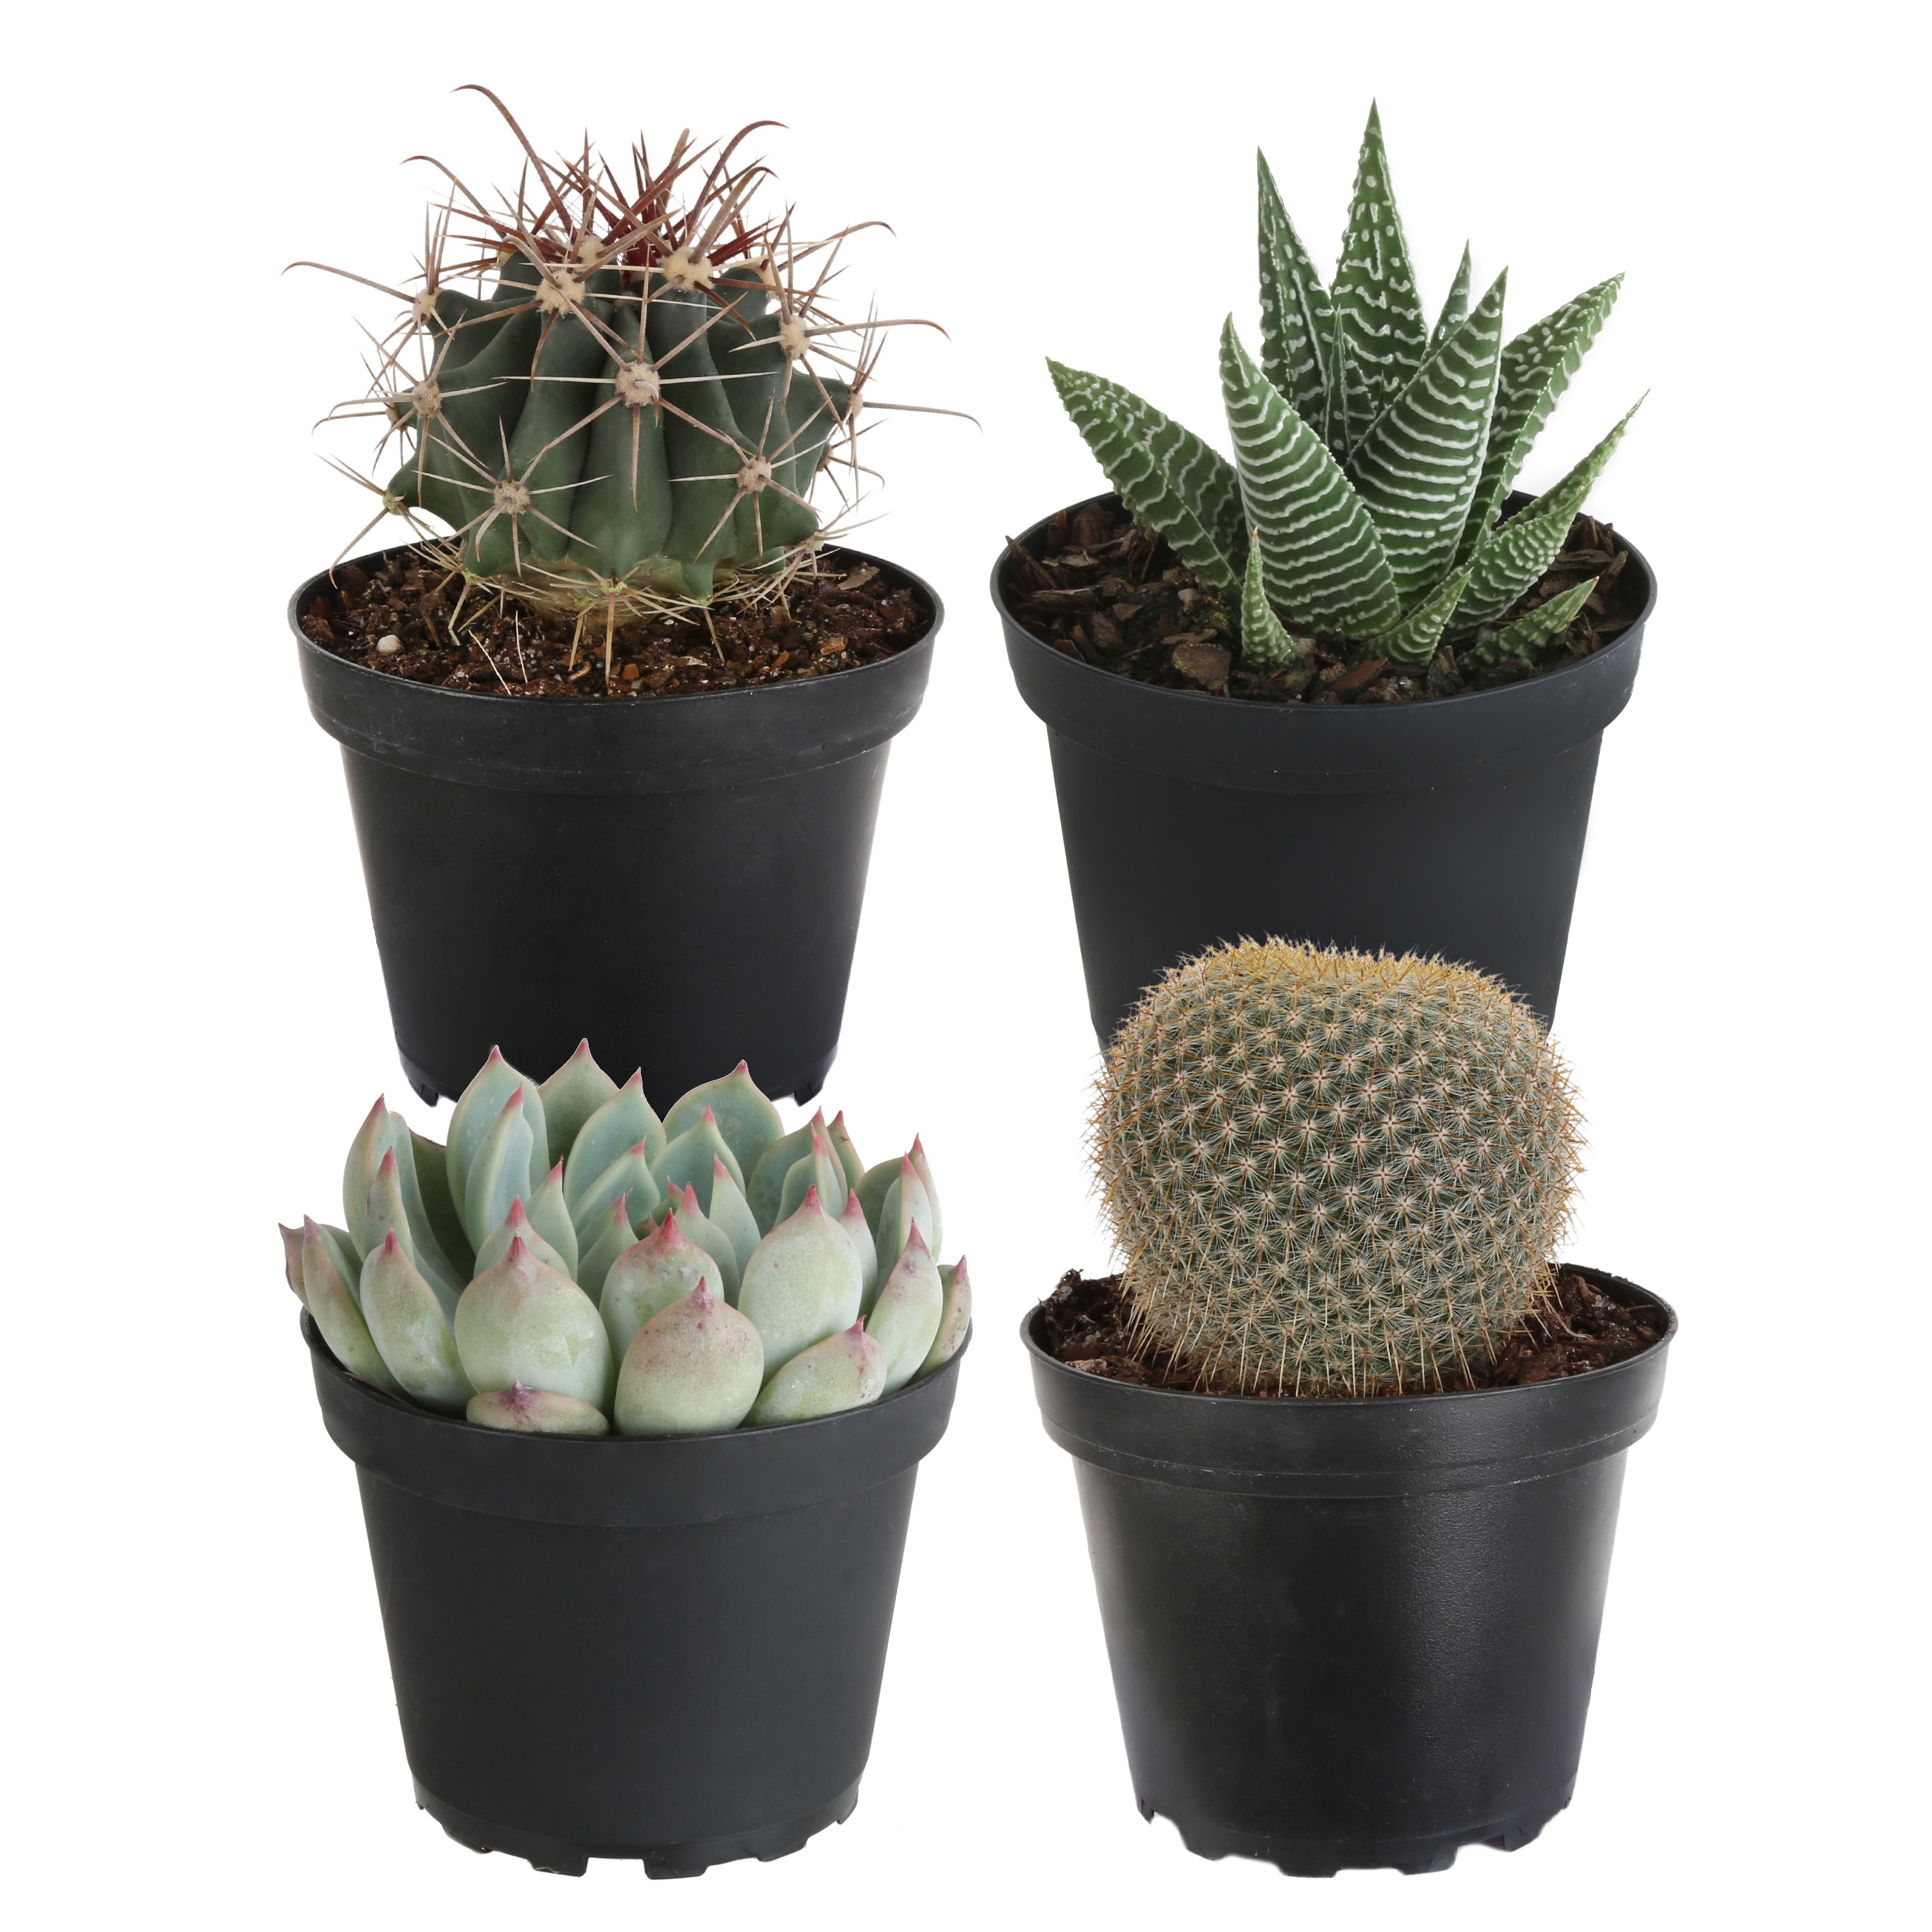 Cactus Succulent Seed Starter Kit - Indoor Garden Grow Kits, Seeds for  Planting Mini Cactus Succulent Plants, Plant Markers, Soil, Pots, Wood Box  